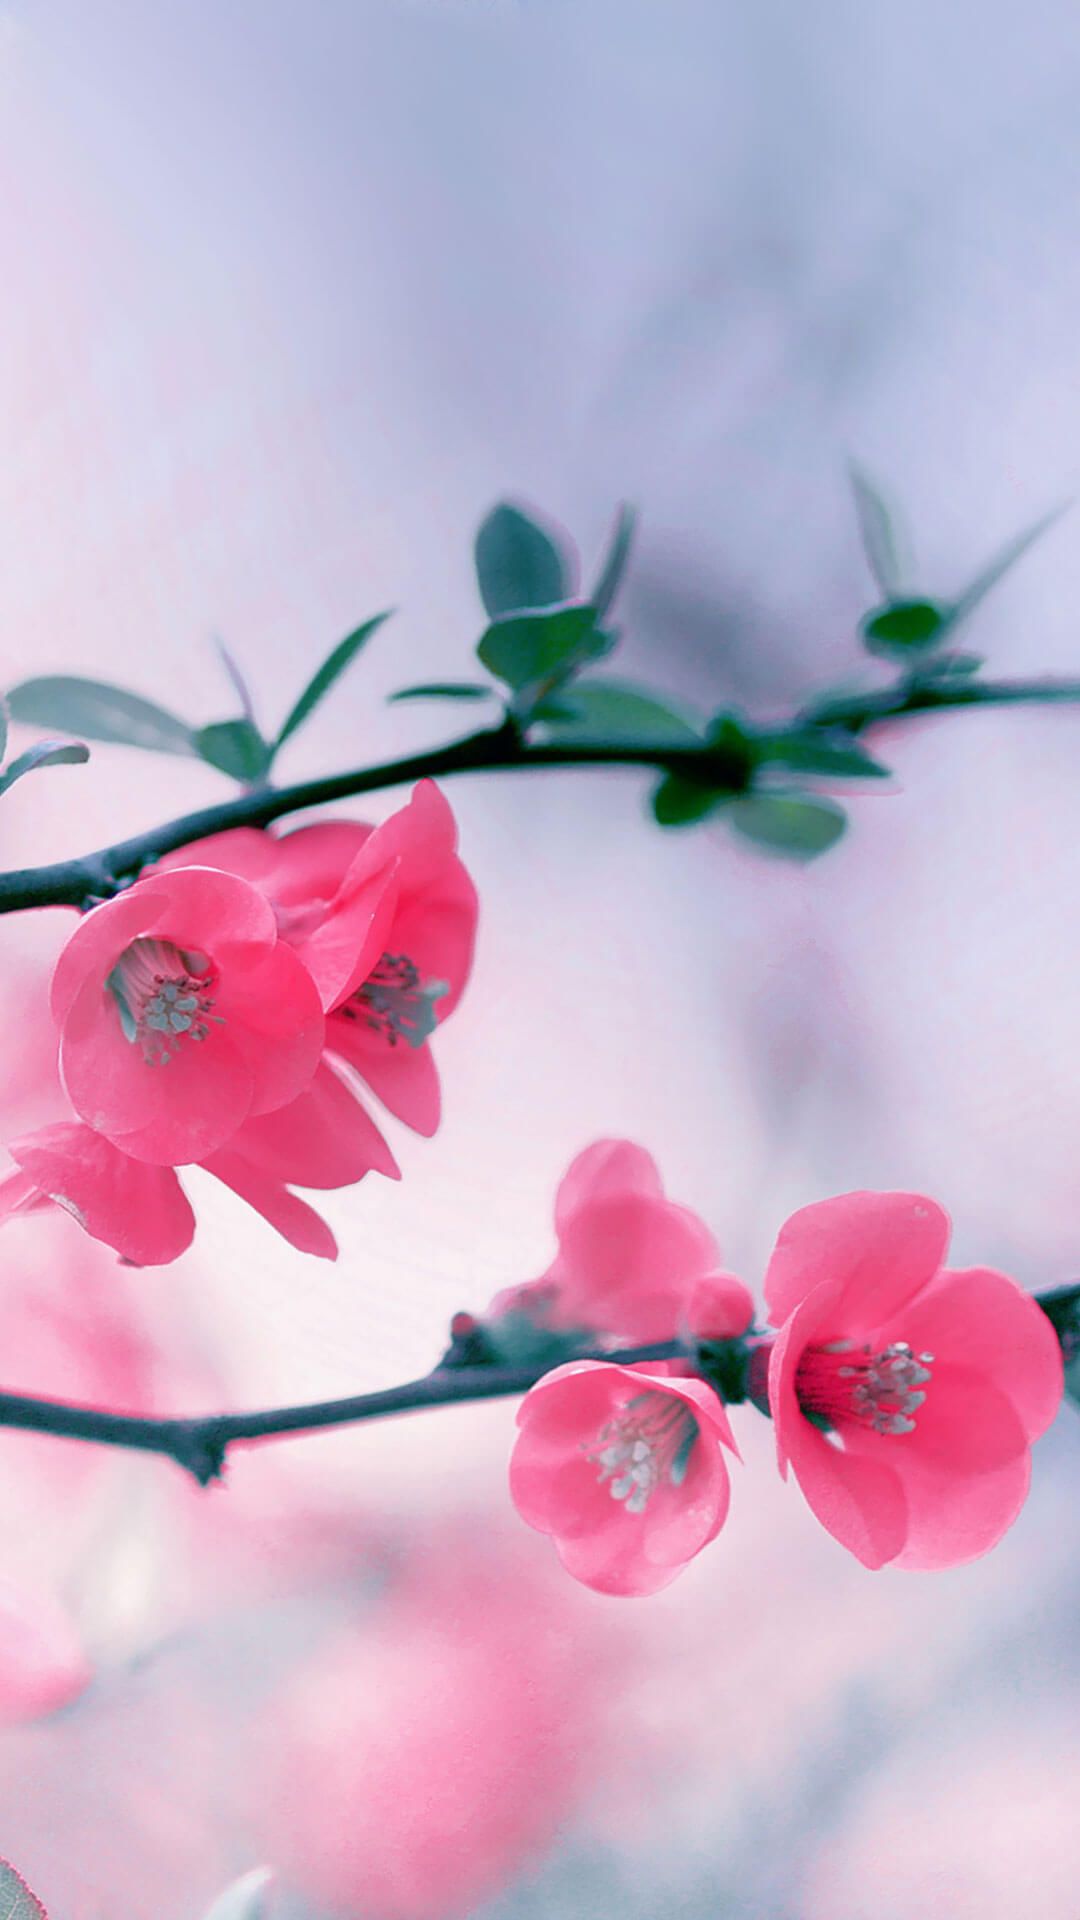 Cherry Blossom Flowers iPhone 6 Wallpaper. Spring wallpaper, Flower wallpaper, iPhone wallpaper photo